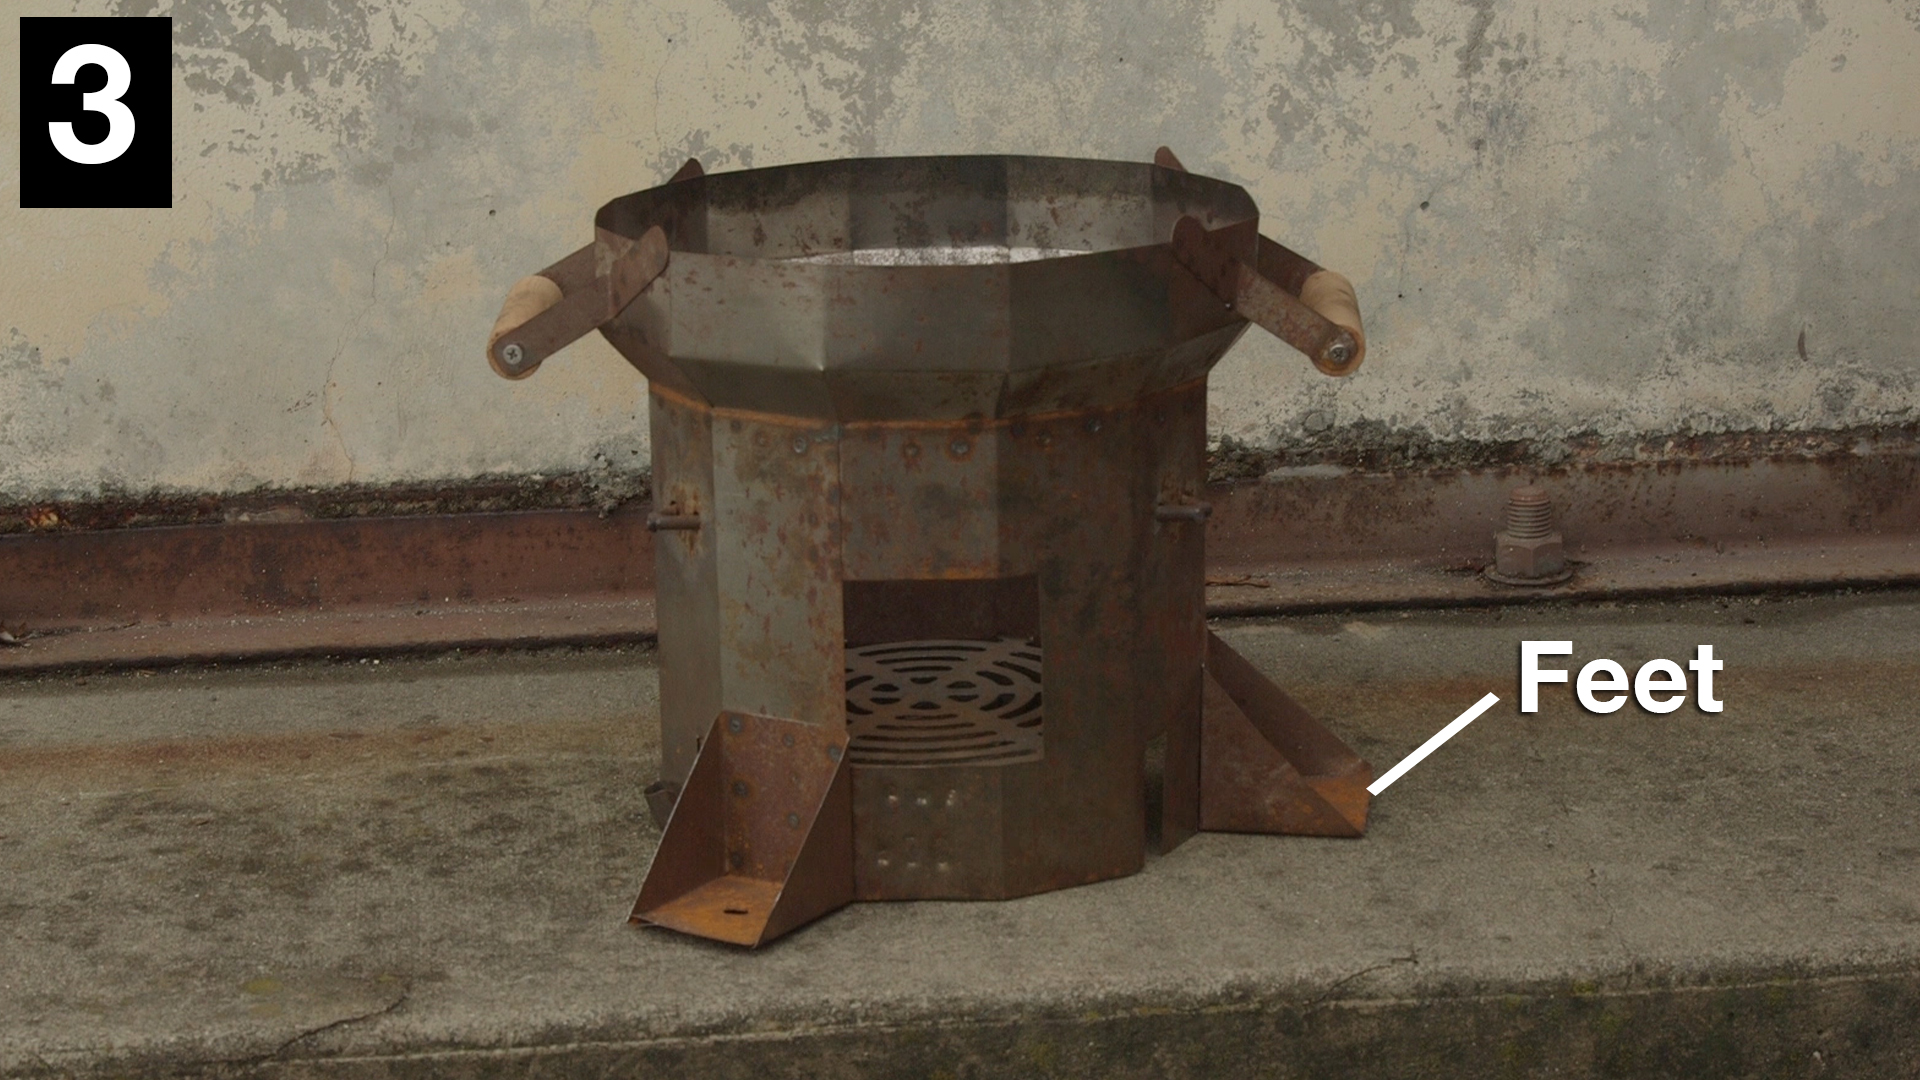 image of pot with large feet for stability